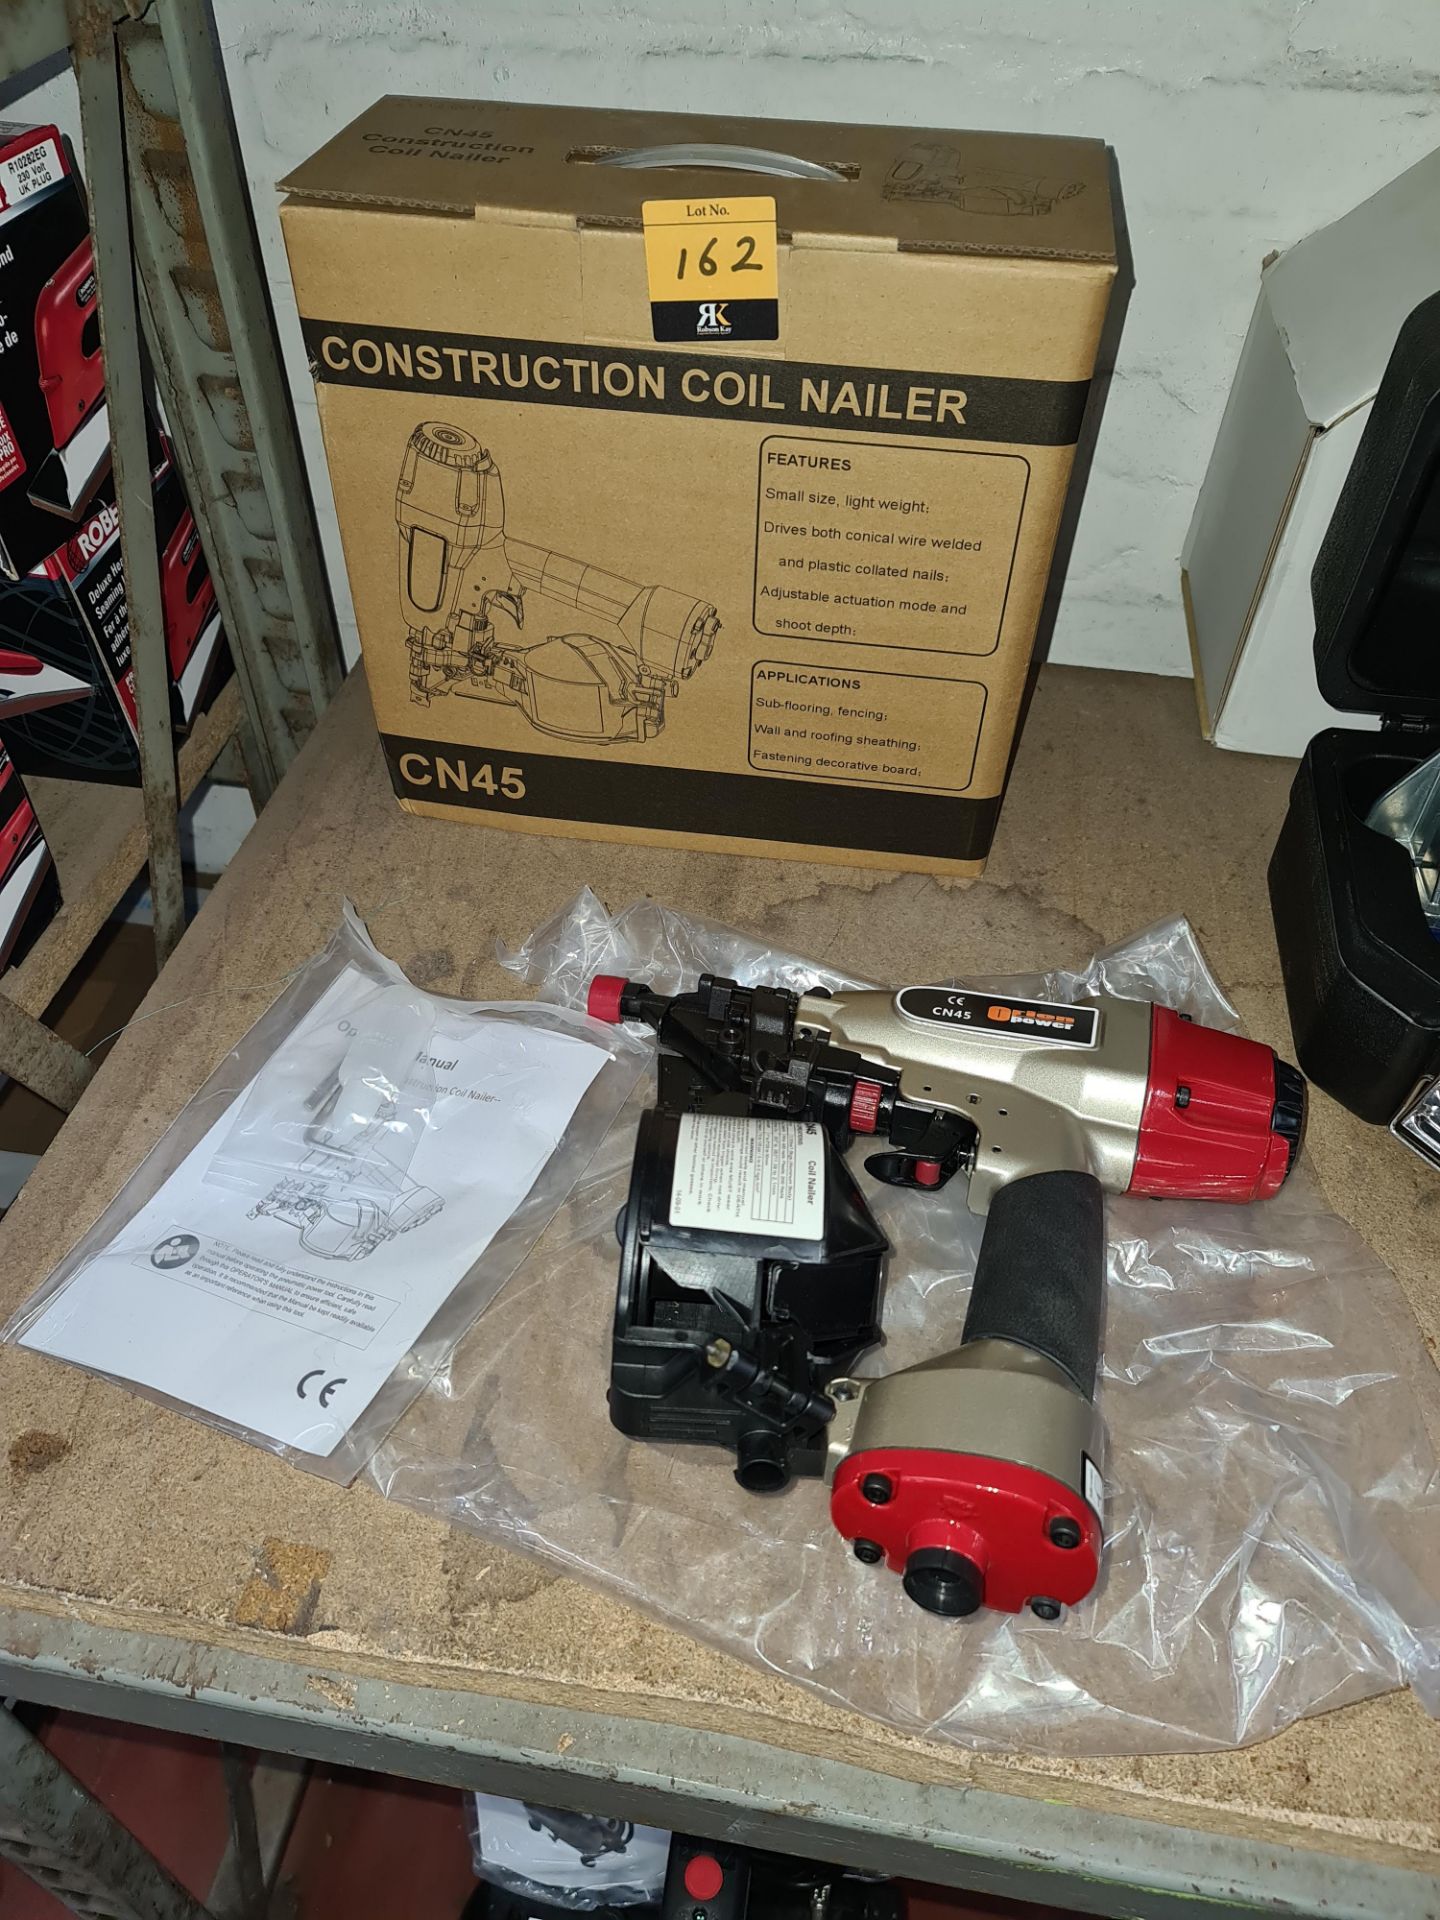 Orion power construction coil nailer model CN45Lots 31 - 328 comprise the total assets of a flooring